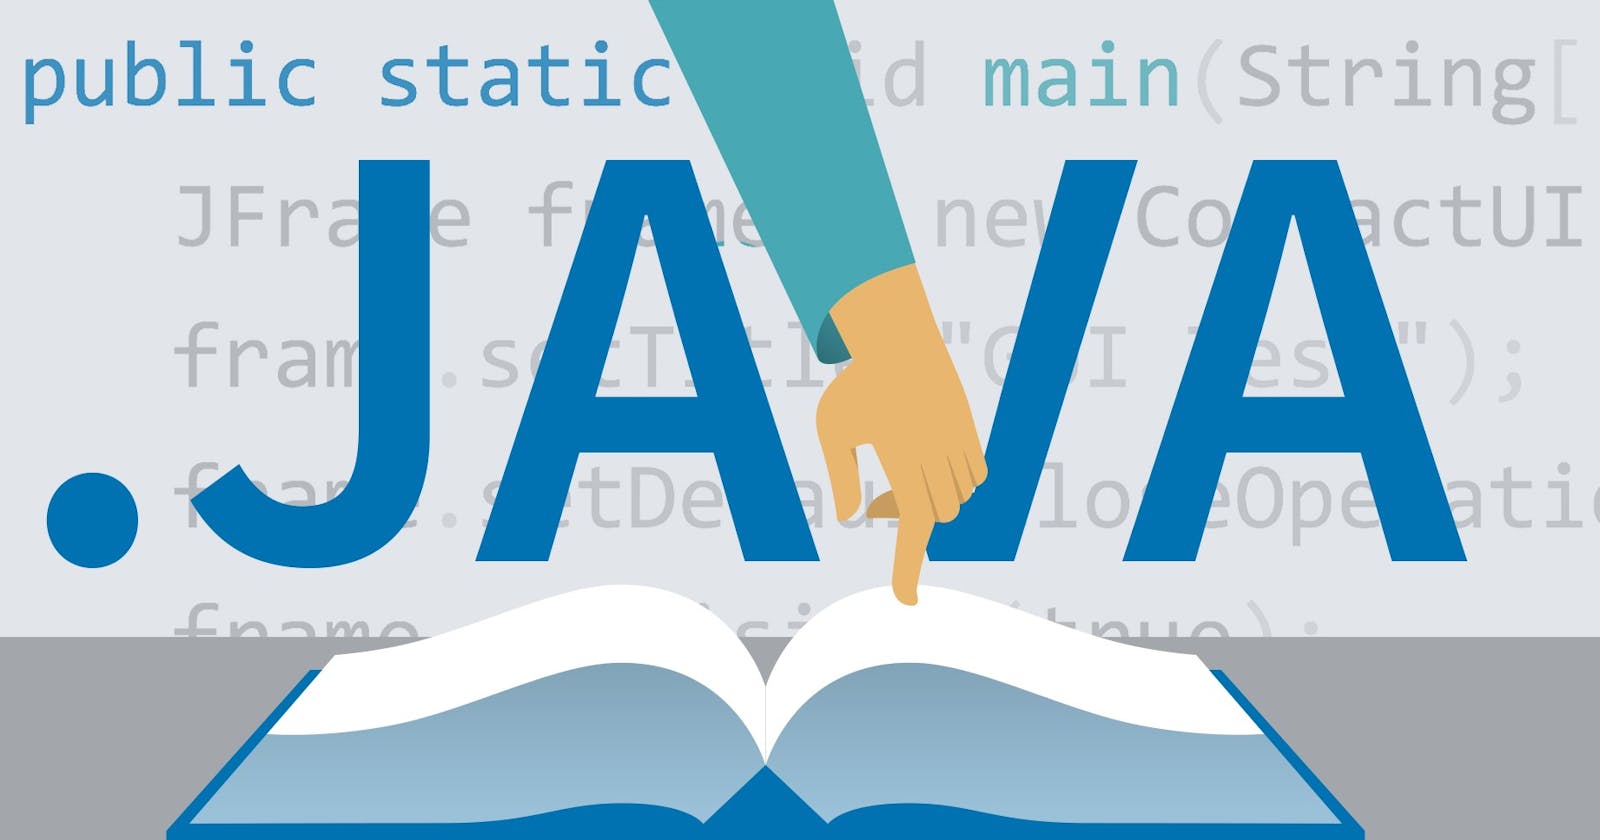 Why is Java still relevant?